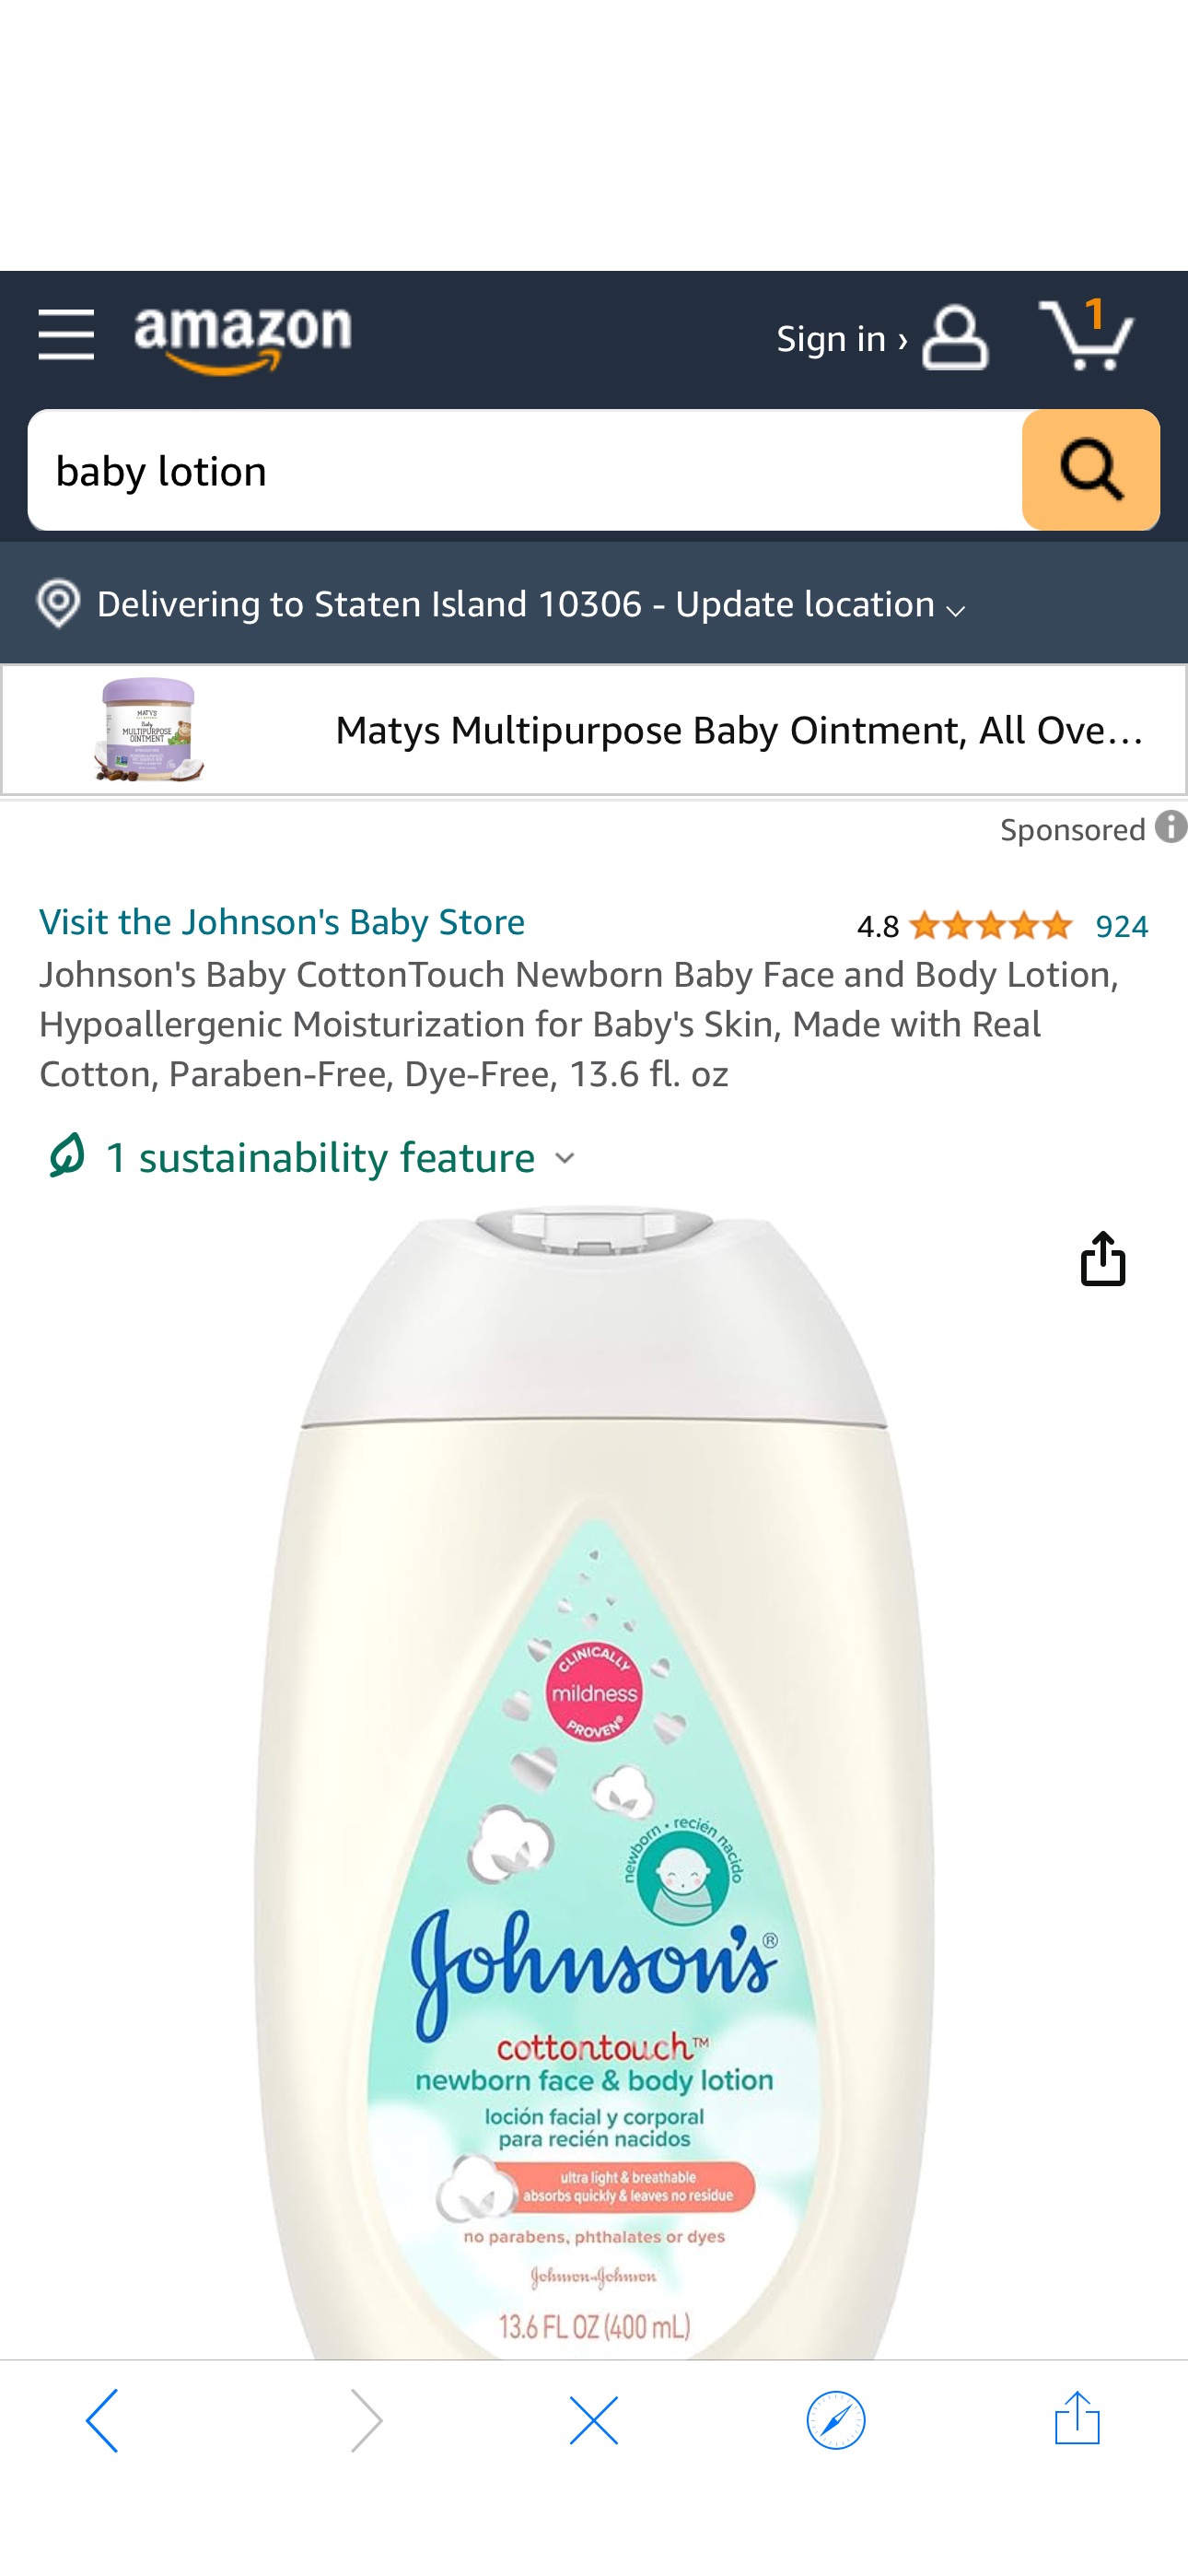 Amazon.com: Johnson's Baby CottonTouch Newborn Baby Face and Body Lotion, Hypoallergenic Moisturization for Baby's Skin, Made with Real Cotton, Paraben-Free, Dye-Free, 13.6 fl. oz : Baby